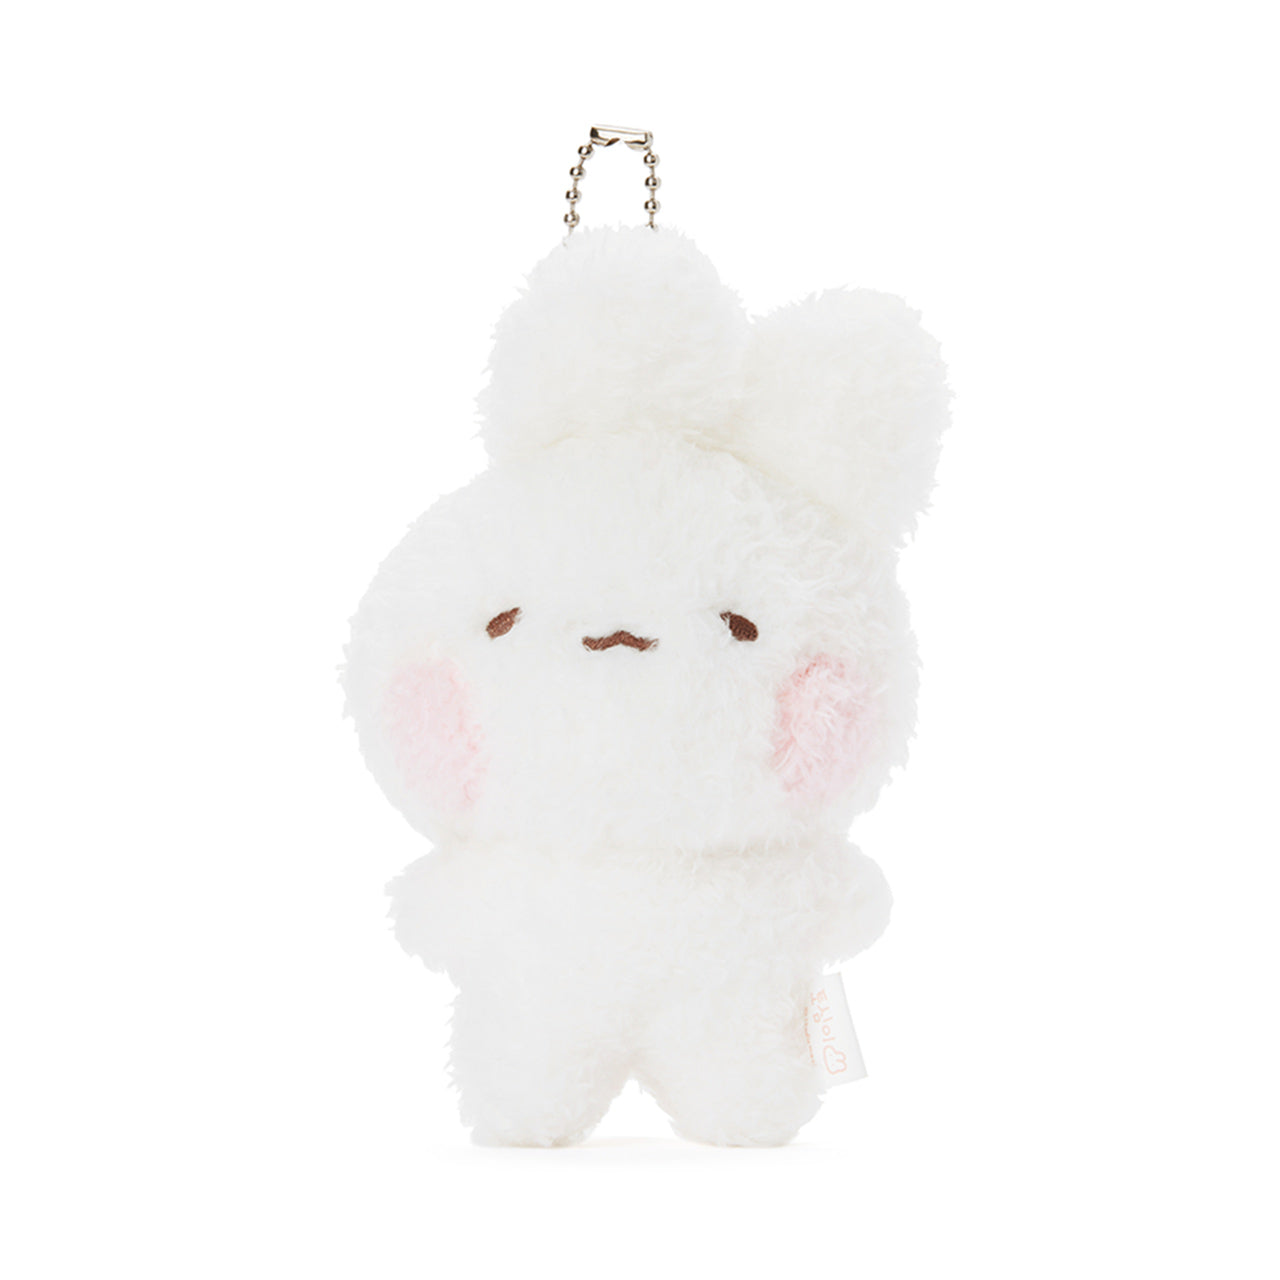 [KAKAO FRIENDS] TOSHIMEE & TOMUNGEE Plush Doll 10cm OFFICIAL MD